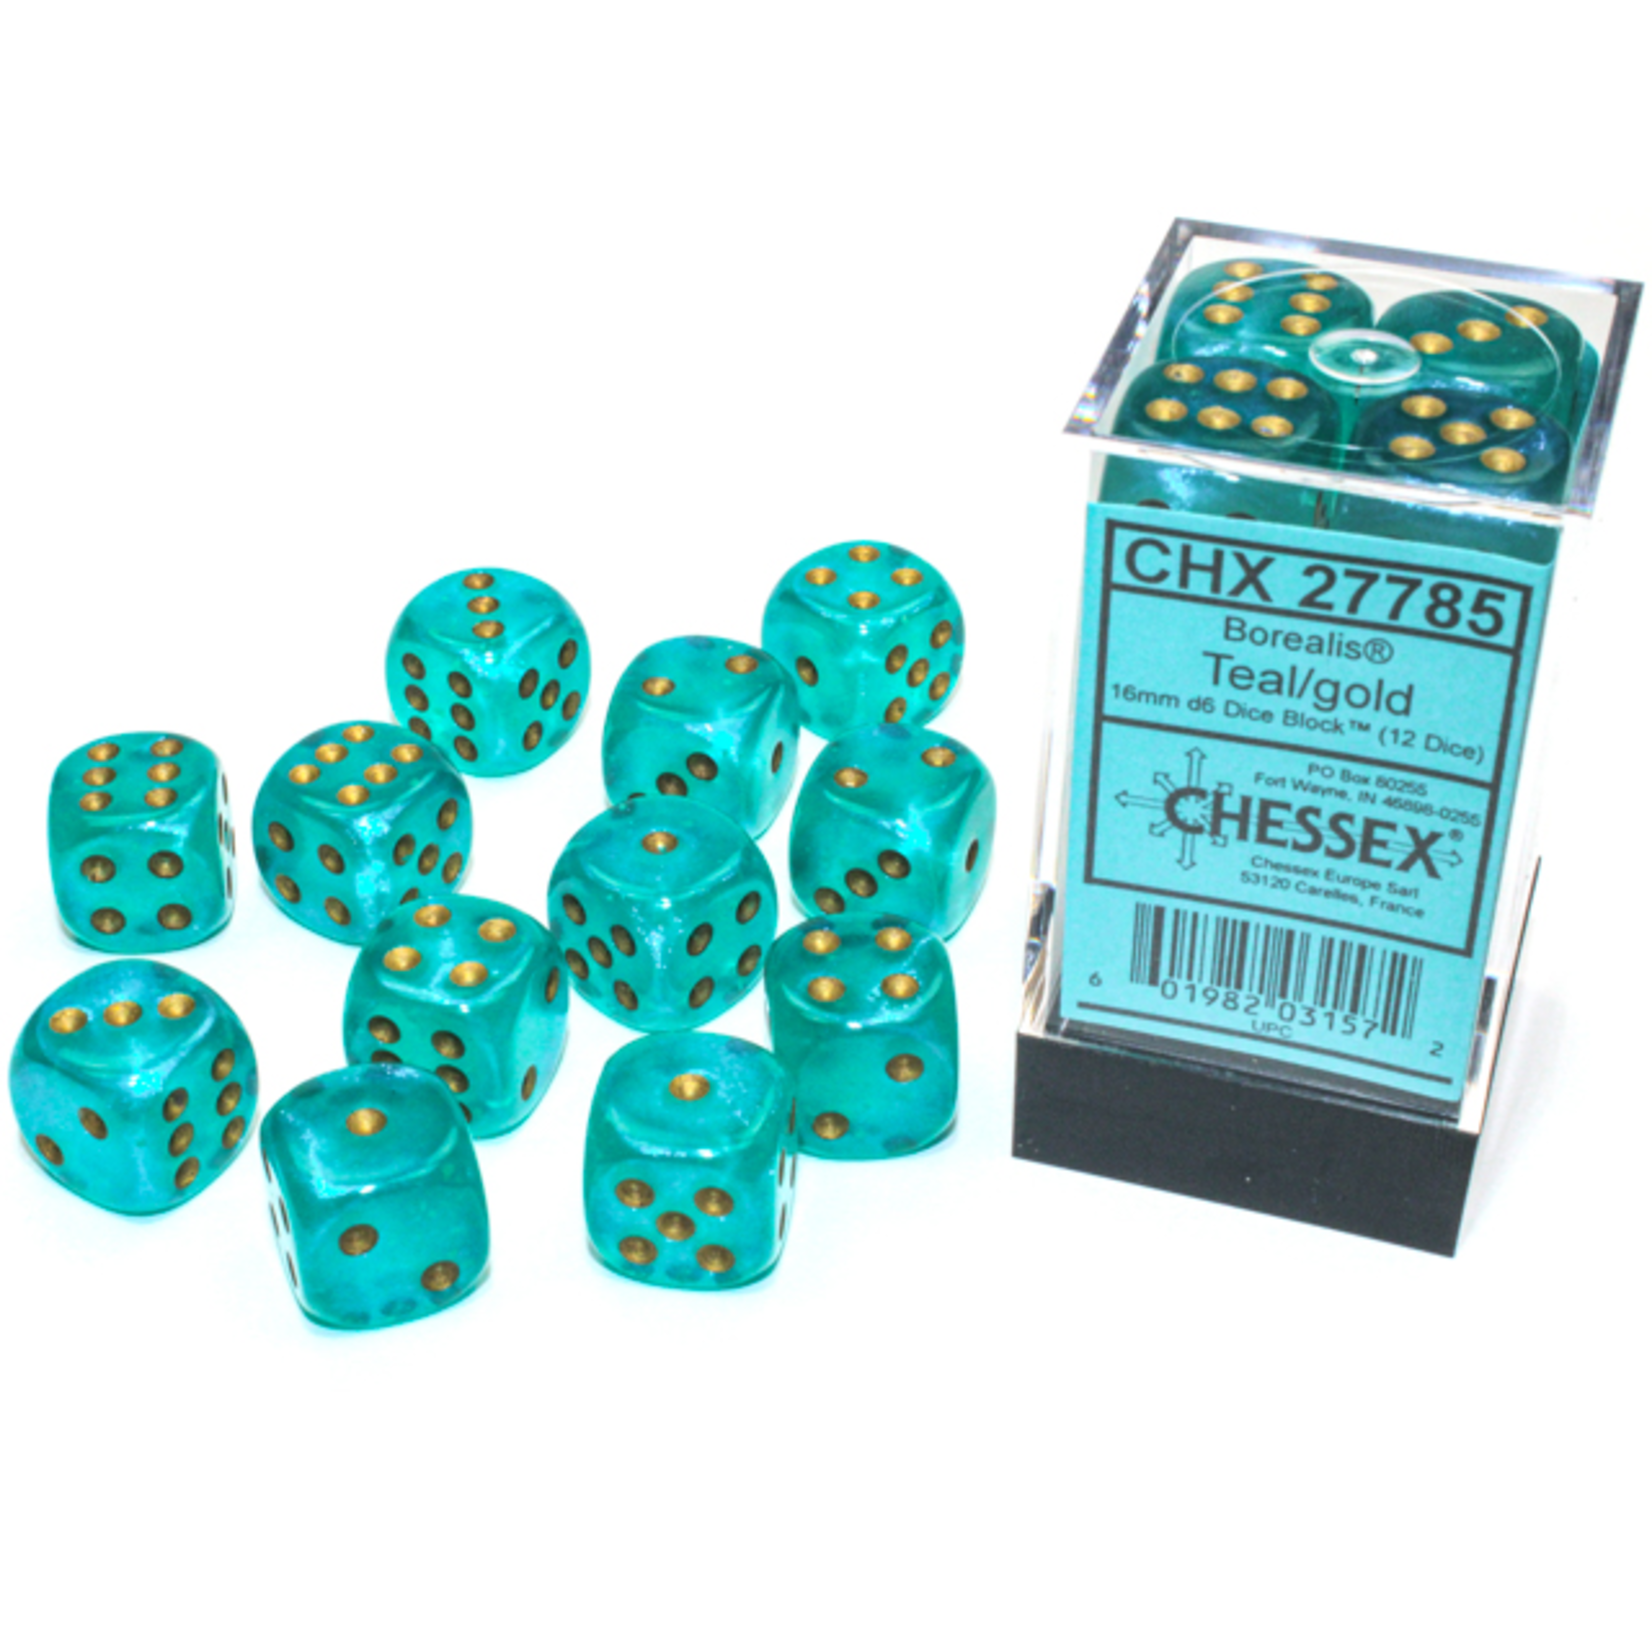 Chessex 12-Piece Dice Set: Borealis Luminary Teal with Gold Pips (16mm, D6s Only)